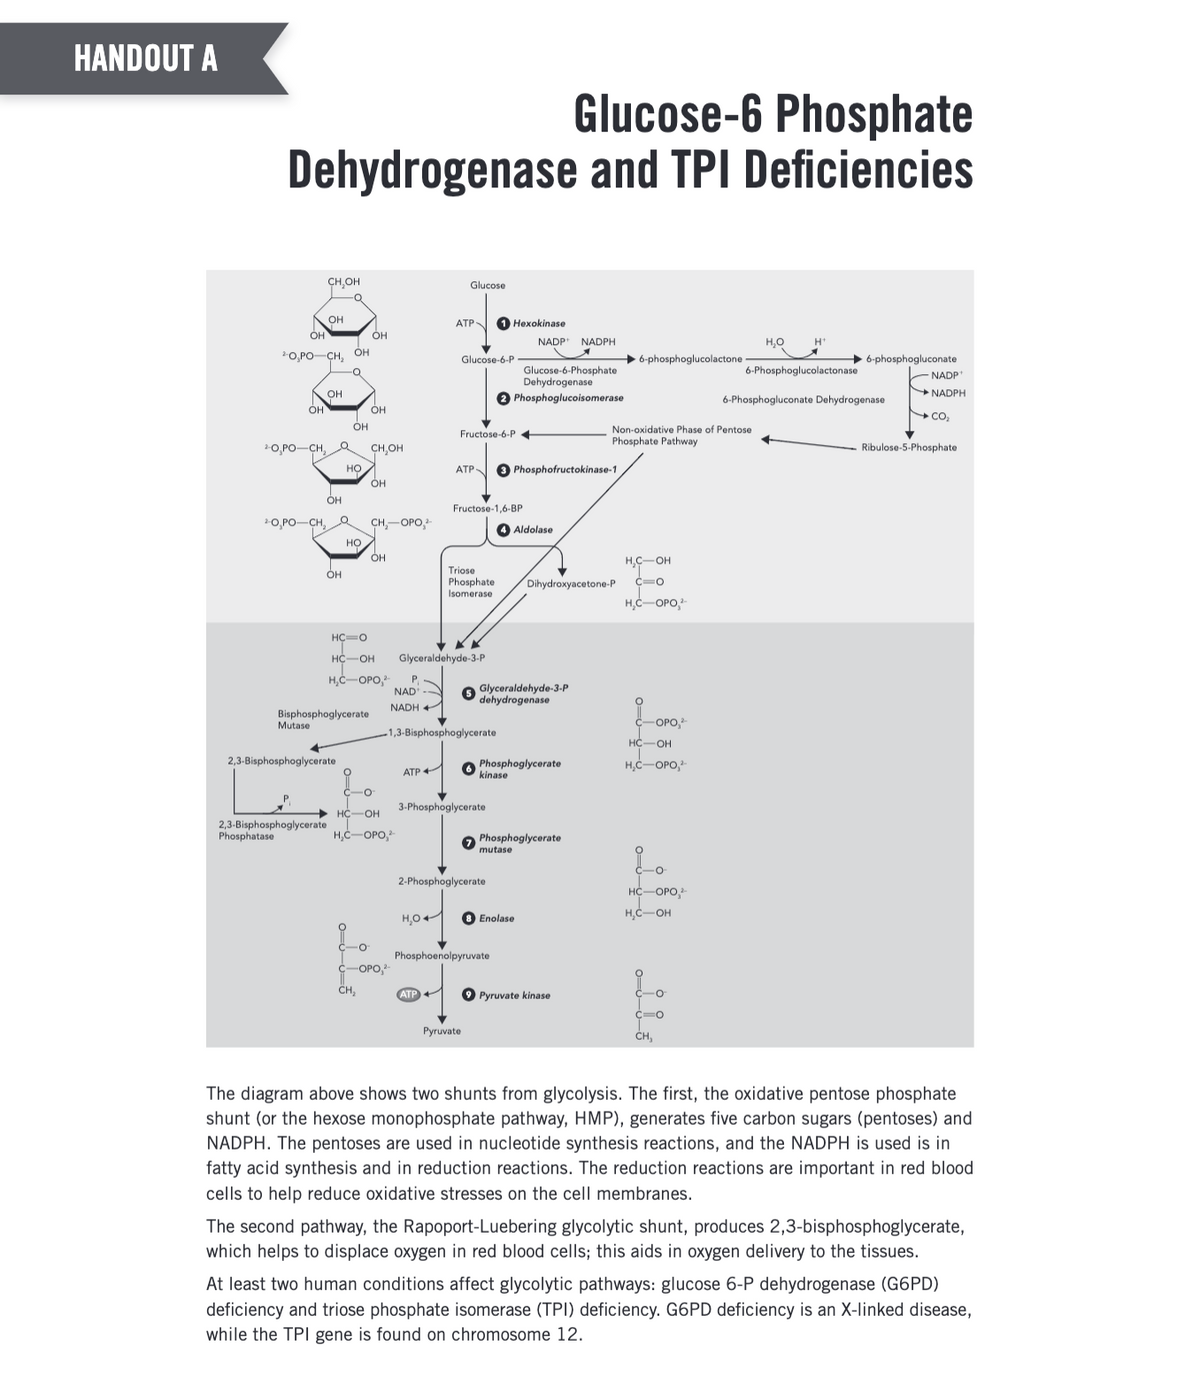 HANDOUT A
Glucose-6 Phosphate
Dehydrogenase and TPI Deficiencies
OH
OH
2-O,PO-CH, OH
O
*OPO—CH,
CH,OH
OH
Mutase
OH
OH
2-0,PO-CH₂ Q
OH
2,3-Bisphosphoglycerate
Phosphatase
OH
HỌ
2,3-Bisphosphoglycerate
Bisphosphoglycerate
НО
OH
OH
CH,OH
OH
CH₂-OPO,²-
OH
ATP+
C-OPO,²-
CH₂
Glucose
ATP
HC=O
HC-OH Glyceraldehyde-3-P
H₂C-OPO,²- P
NAD
NADH
H₂O+
Glucose-6-P
ATP
Fructose-6-P◄
1,3-Bisphosphoglycerate
Fructose-1,6-BP
1 Hexokinase
ATP 3 Phosphofructokinase-1
-O
HC OH 3-Phosphoglycerate
H₂C-OPO,²
Glucose-6-Phosphate
Dehydrogenase
2 Phosphoglucoisomerase
Pyruvate
Triose
H₂C-OH
Phosphate Dihydroxyacetone-P C=O
Isomerase
Glyceraldehyde-3-P
dehydrogenase
2-Phosphoglycerate
NADP NADPH
A
4 Aldolase
Phosphoglycerate
kinase
Phosphoenolpyruvate
Phosphoglycerate
mutase
8 Enolase
6-phosphoglucolactone.
Pyruvate kinase
Non-oxidative Phase of Pentose
Phosphate Pathway
H₂C-OPO,¹
0=000
-OPO,²-
HC-OH
H₂C-OPO,¹
요。
HC-OPO,
H₂C-OH
c=o
CH₂
H₂O
H
6-Phosphoglucolactonase
6-phosphogluconate
6-Phosphogluconate Dehydrogenase
NADP+
NADPH
CO₂
Ribulose-5-Phosphate
The diagram above shows two shunts from glycolysis. The first, the oxidative pentose phosphate
shunt (or the hexose monophosphate pathway, HMP), generates five carbon sugars (pentoses) and
NADPH. The pentoses are used in nucleotide synthesis reactions, and the NADPH is used is in
fatty acid synthesis and in reduction reactions. The reduction reactions are important in red blood
cells to help reduce oxidative stresses on the cell membranes.
The second pathway, the Rapoport-Luebering glycolytic shunt, produces 2,3-bisphosphoglycerate,
which helps to displace oxygen in red blood cells; this aids in oxygen delivery to the tissues.
At least two human conditions affect glycolytic pathways: glucose 6-P dehydrogenase (G6PD)
deficiency and triose phosphate isomerase (TPI) deficiency. G6PD deficiency is an X-linked disease,
while the TPI gene is found on chromosome 12.